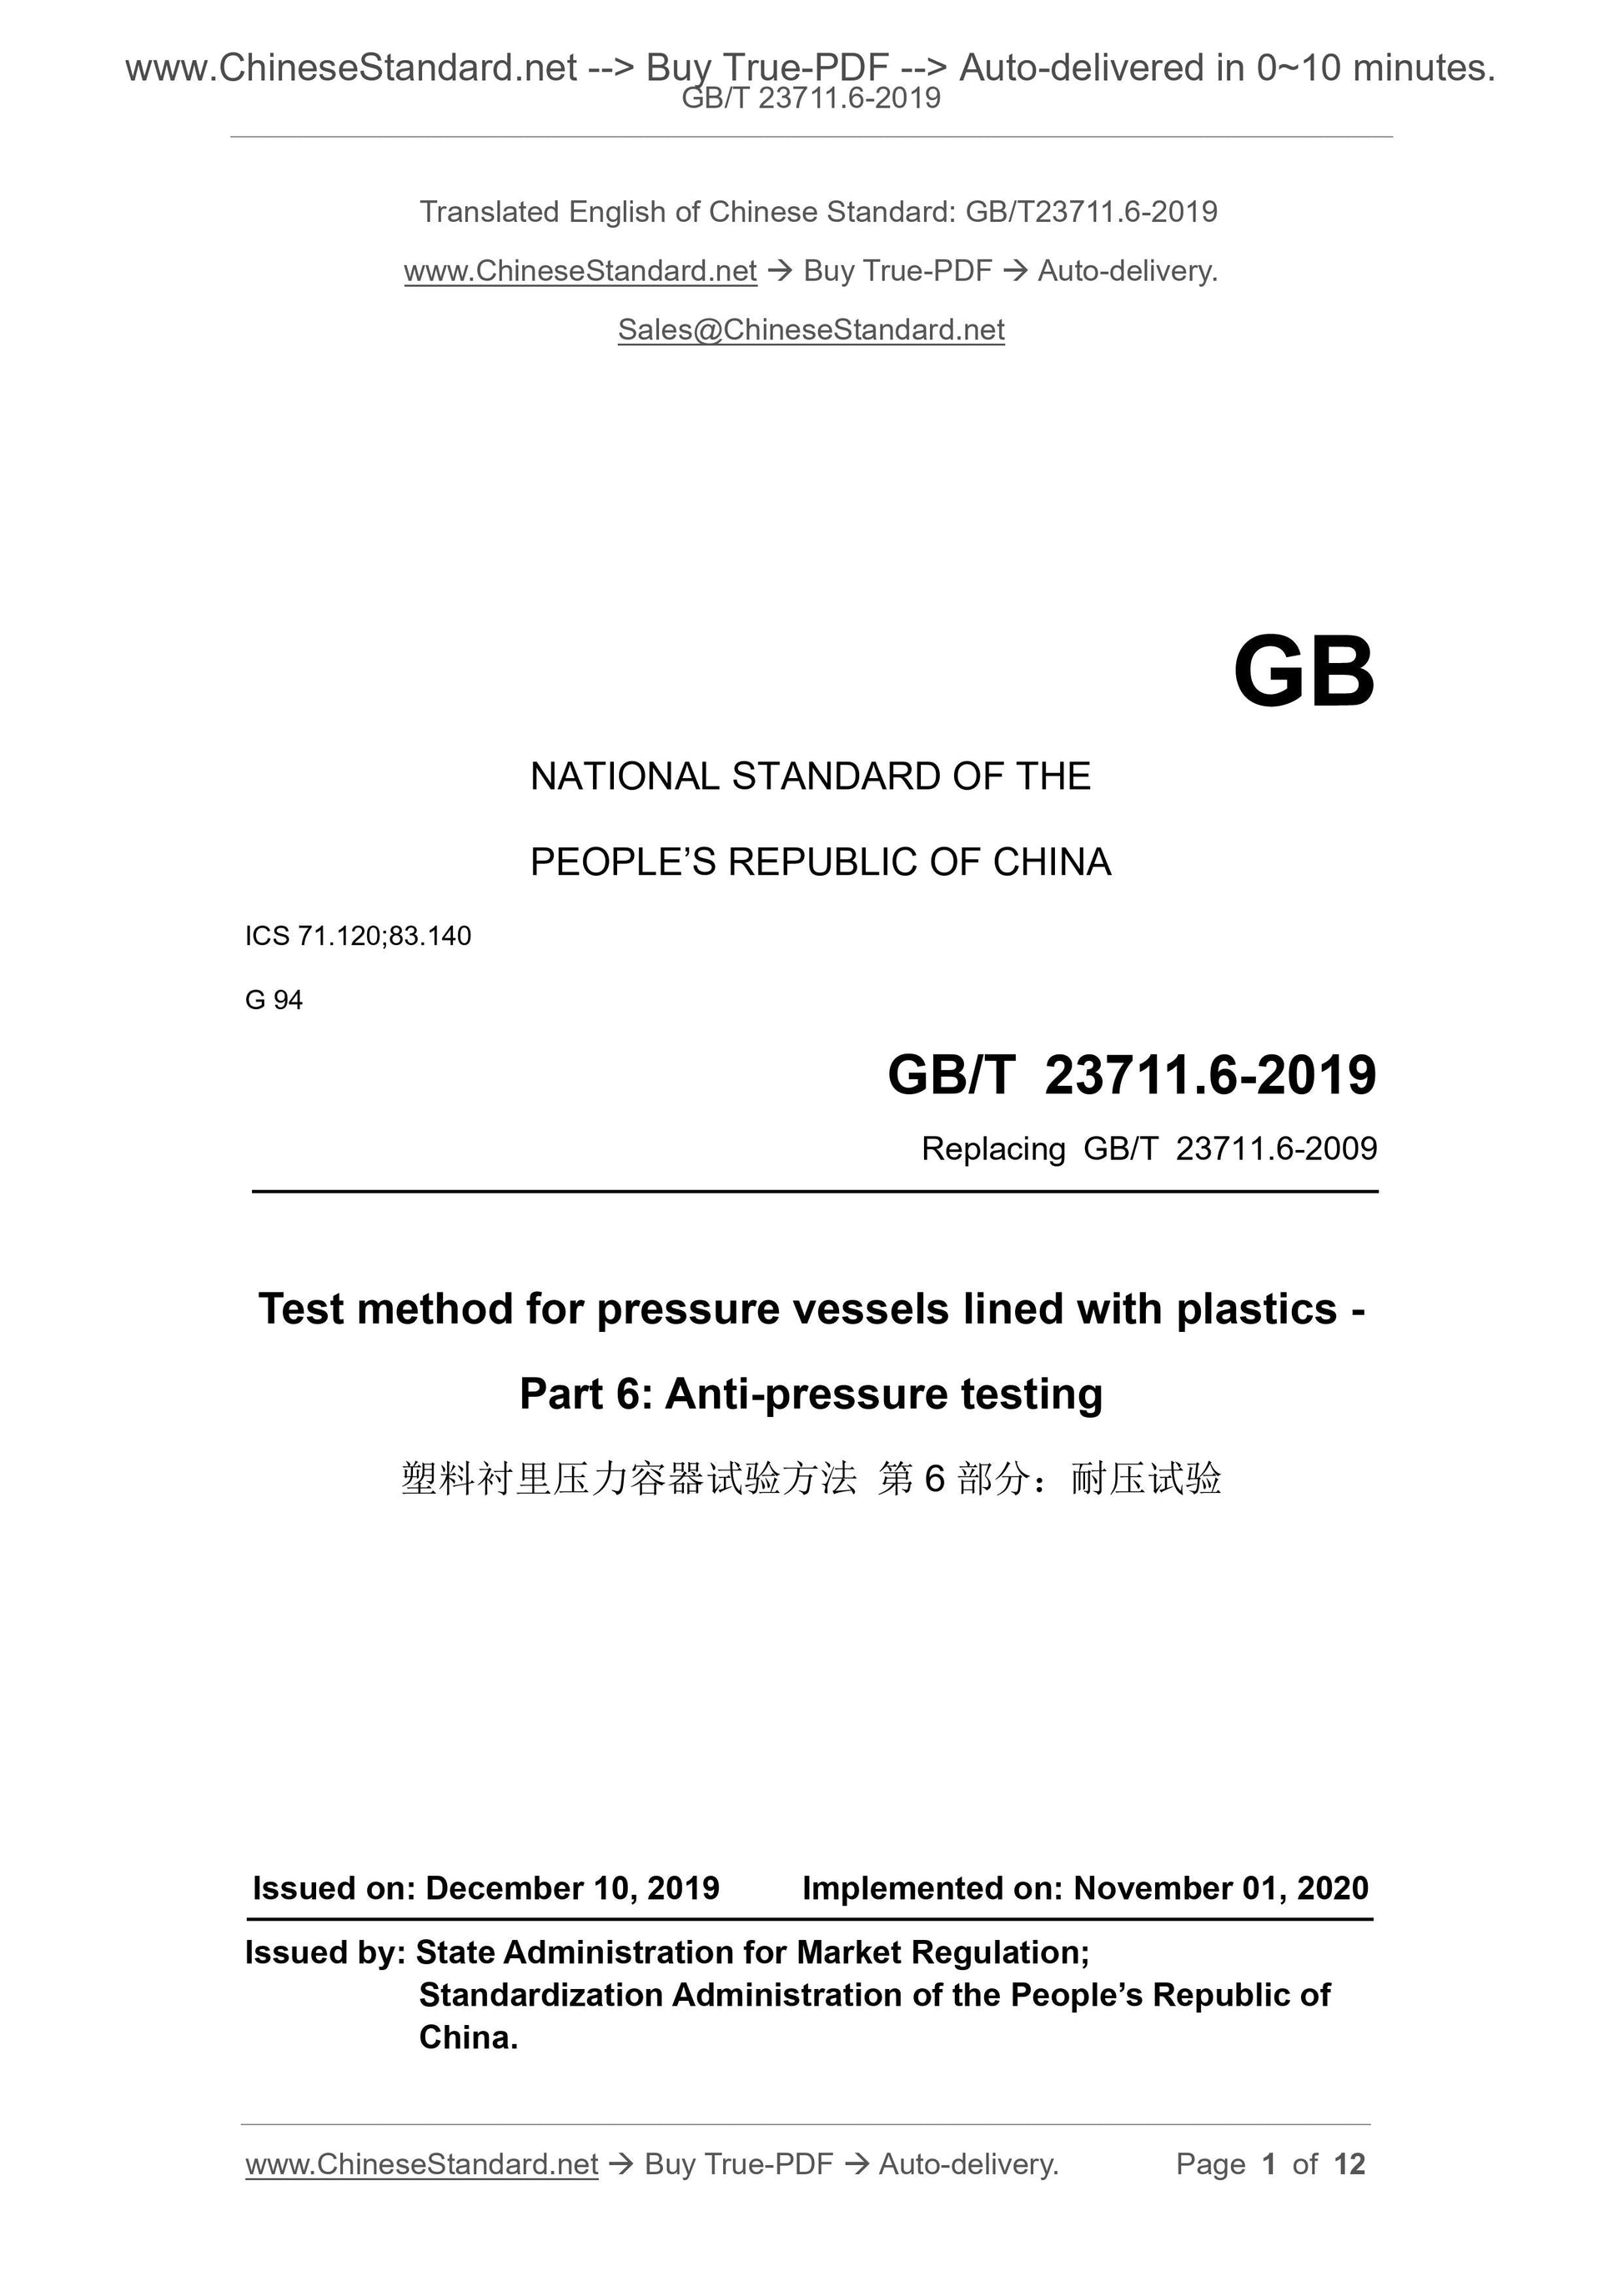 GB/T 23711.6-2019 Page 1